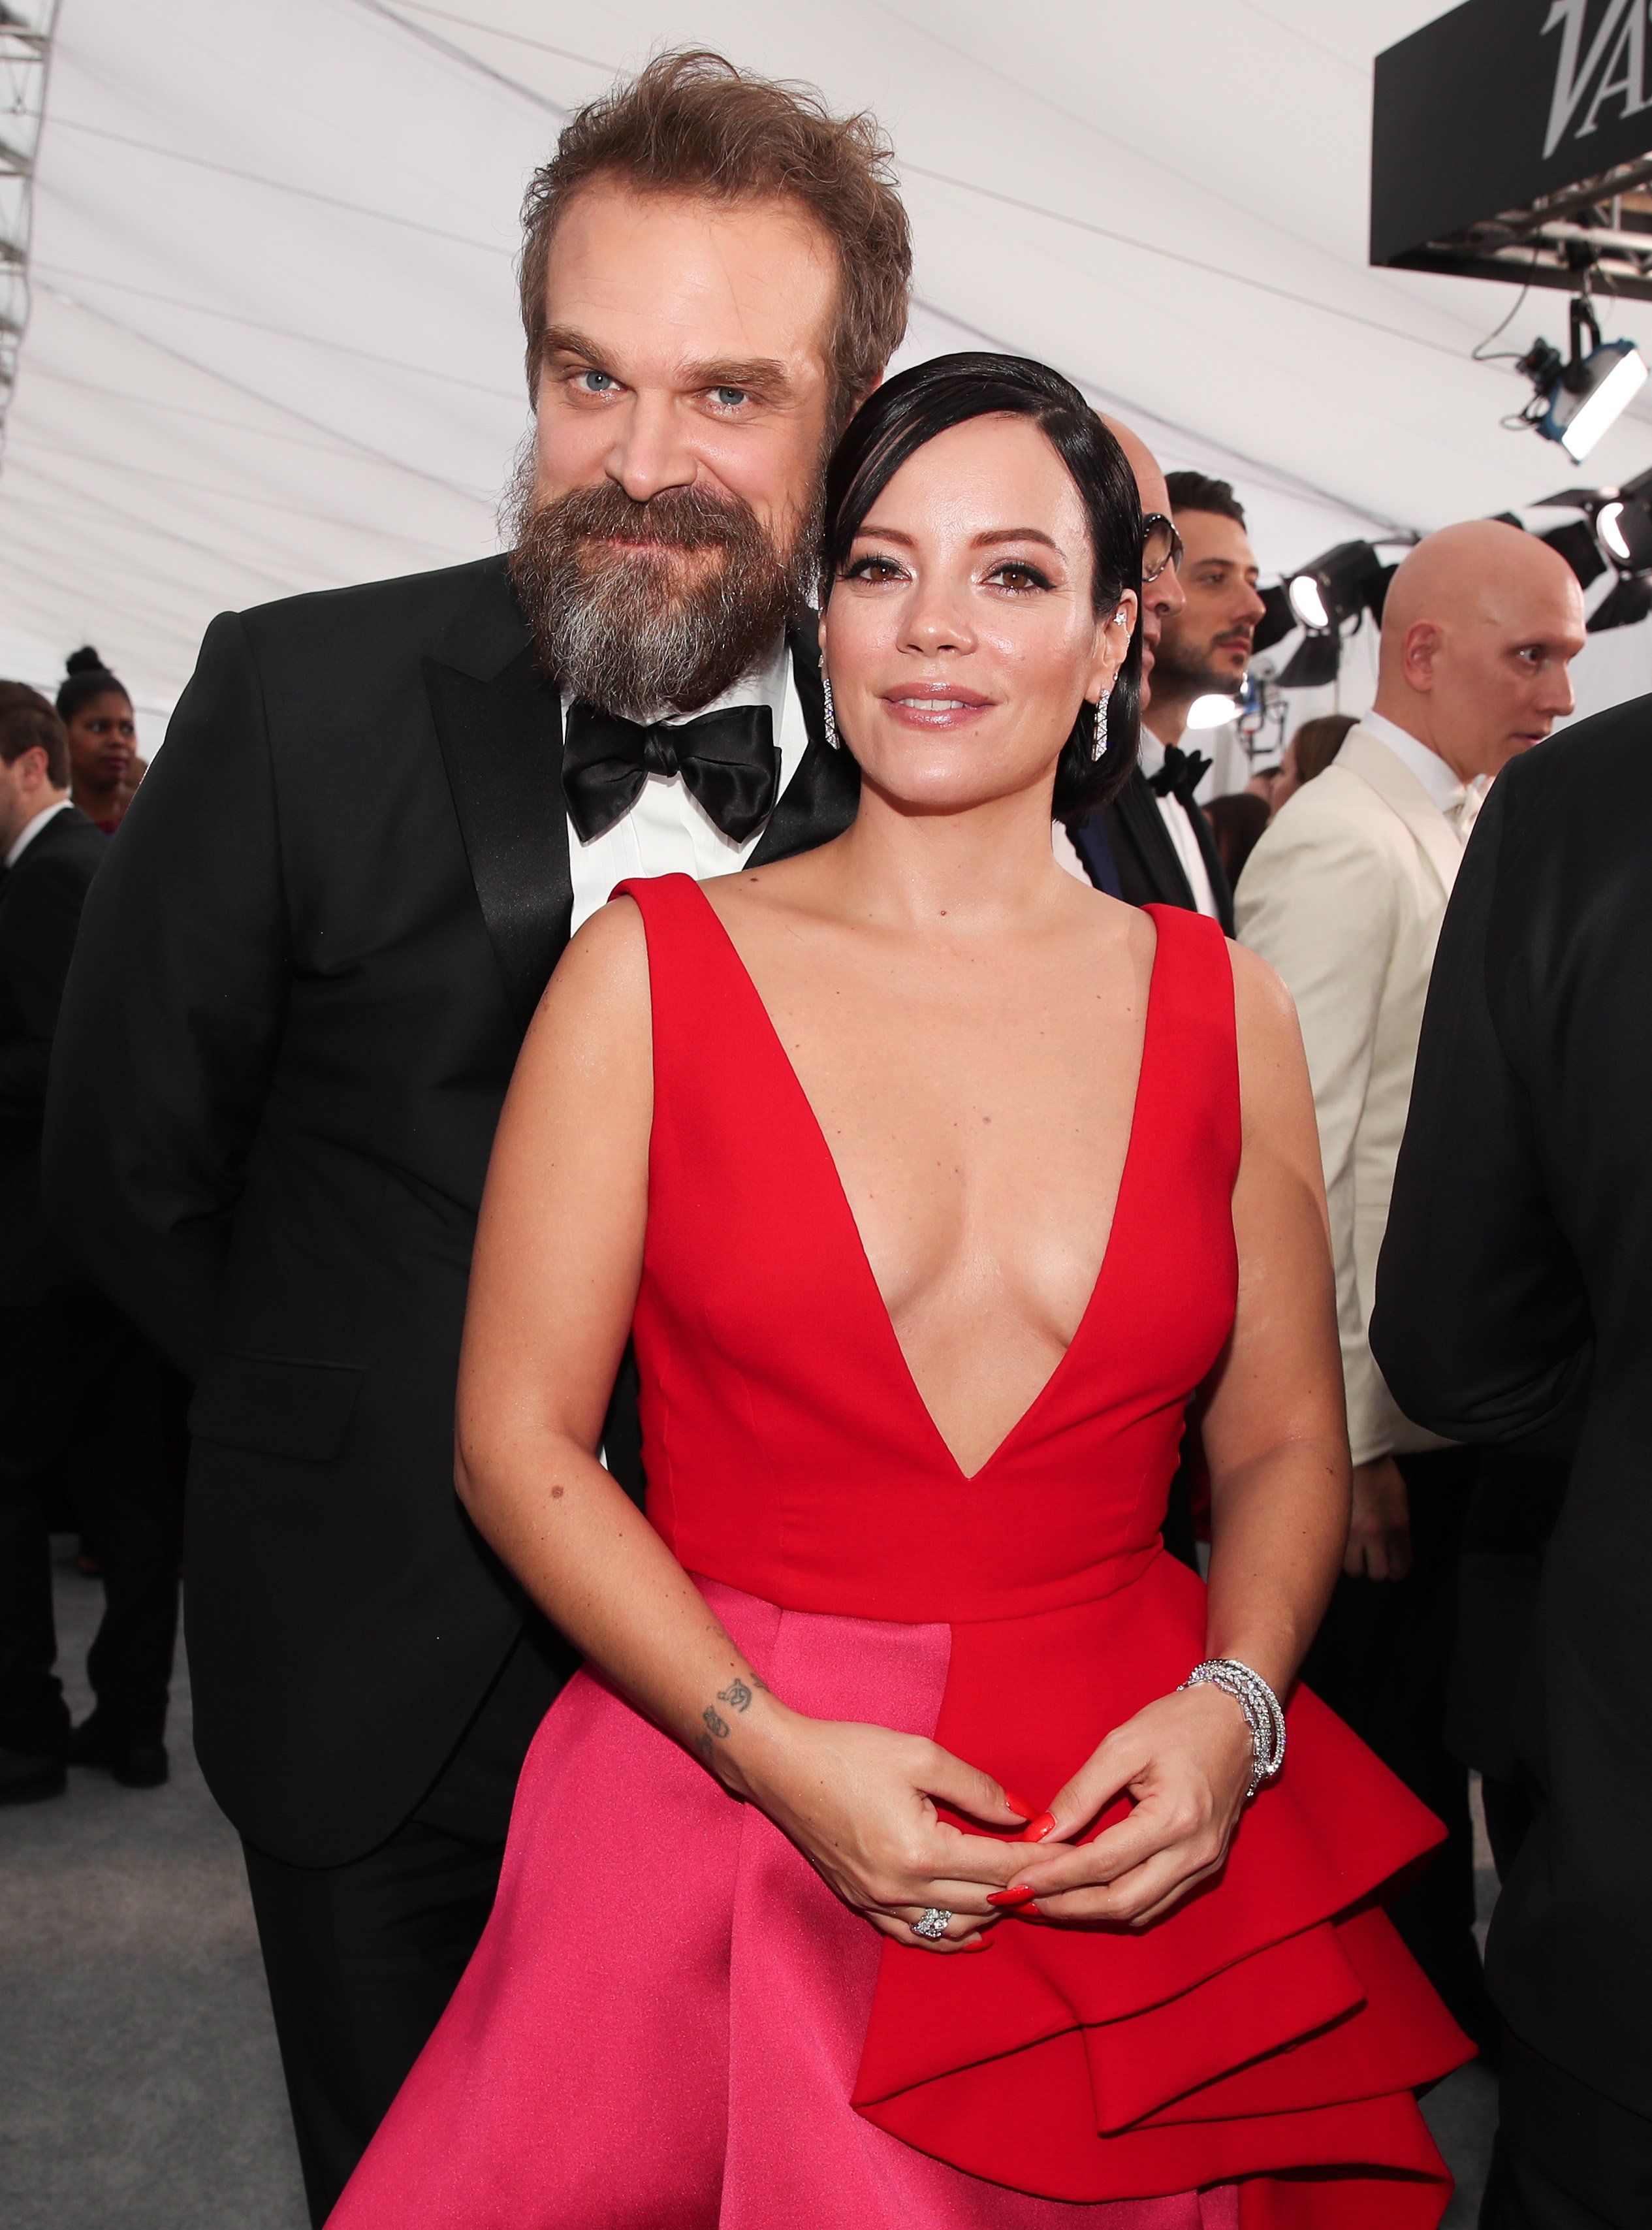 <p>"Stranger Things" star David Harbour and British pop singer Lily Allen struck many as an unexpected pairing when they took their romance public in 2019, a little more than a year before <a href="https://www.wonderwall.com/entertainment/stars-who-wed-in-vegas-21467.gallery?photoId=469489">they tied the knot in Las Vegas</a> in 2020. In July 2022, the world learned how their relationship started: They met on the ultra-exclusive dating app Raya. "I was in London alone, doing 'Black Widow,' on this app, going on dates and stuff. And yeah, I started texting with her, she was in Italy at the time — we got together, went on a date at the Wolseley [restaurant in London], and it was, you know, she's f****** unbelievable," David told <a href="https://www.gq-magazine.co.uk/culture/article/david-harbour-stranger-things-finale-interview">GQ Hype</a> in July 2002. </p><p>They fell for each other hard and fast. "She claims to have fallen in love at first sight with me — I mean, who wouldn't?" he quipped before sharing when he fell in love with her. "I remember the exact moment. It was our third date. I was just in this phase where I was like, I'm just going to be brutally honest about everything, because why lie? And I told her something about my life, about my beliefs..." he said, adding, "It would take a really extraordinary person to be accepting of the things that I said. And I remember thinking: Wow, that's somebody I want to be around."</p>